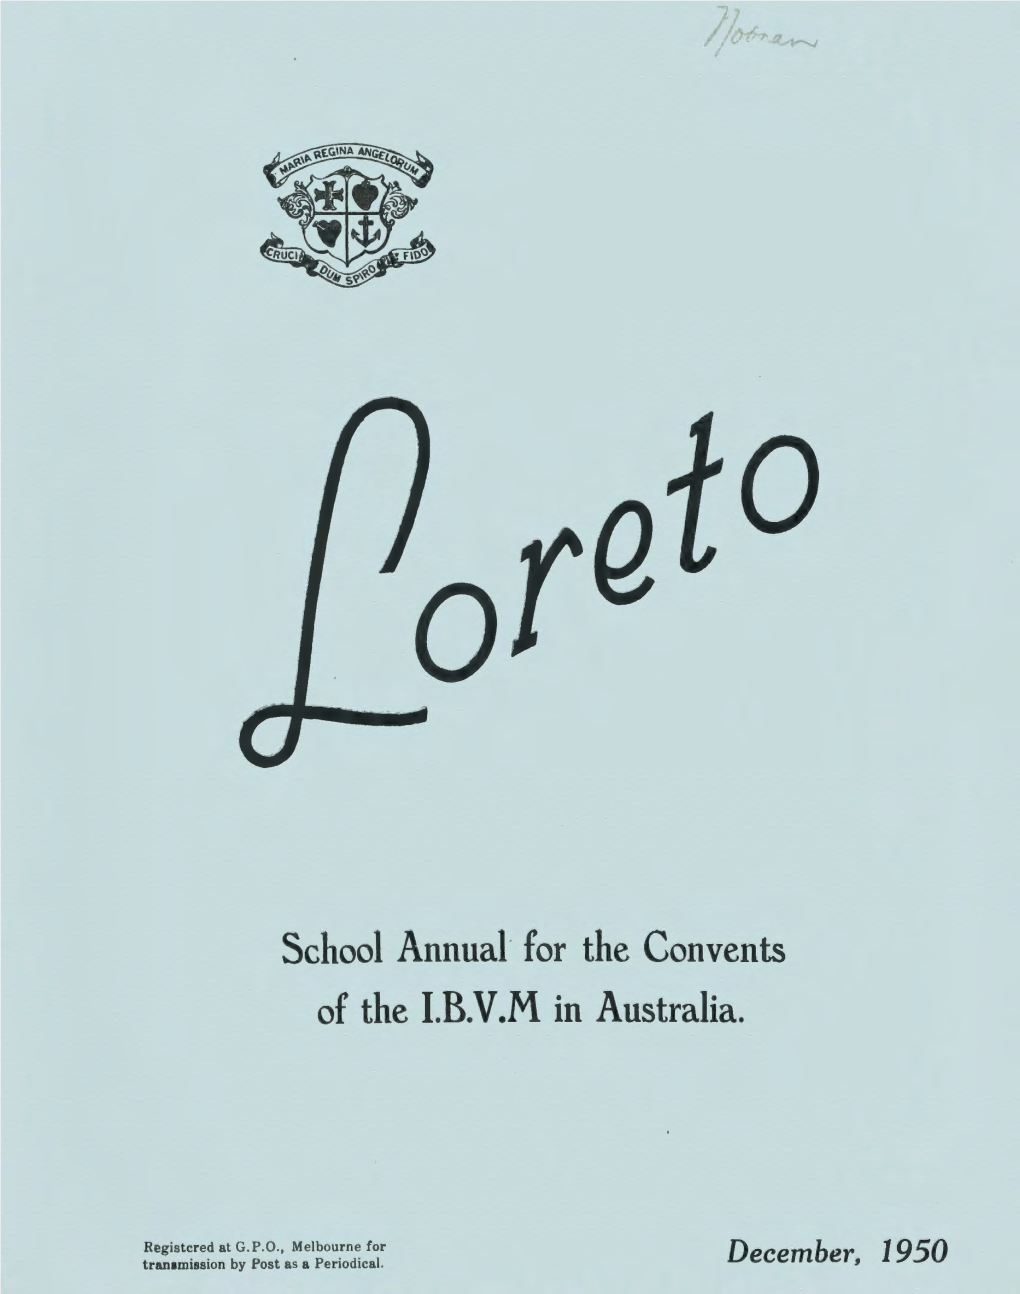 School Annual for the Convents of the L.B.V.M in Australia